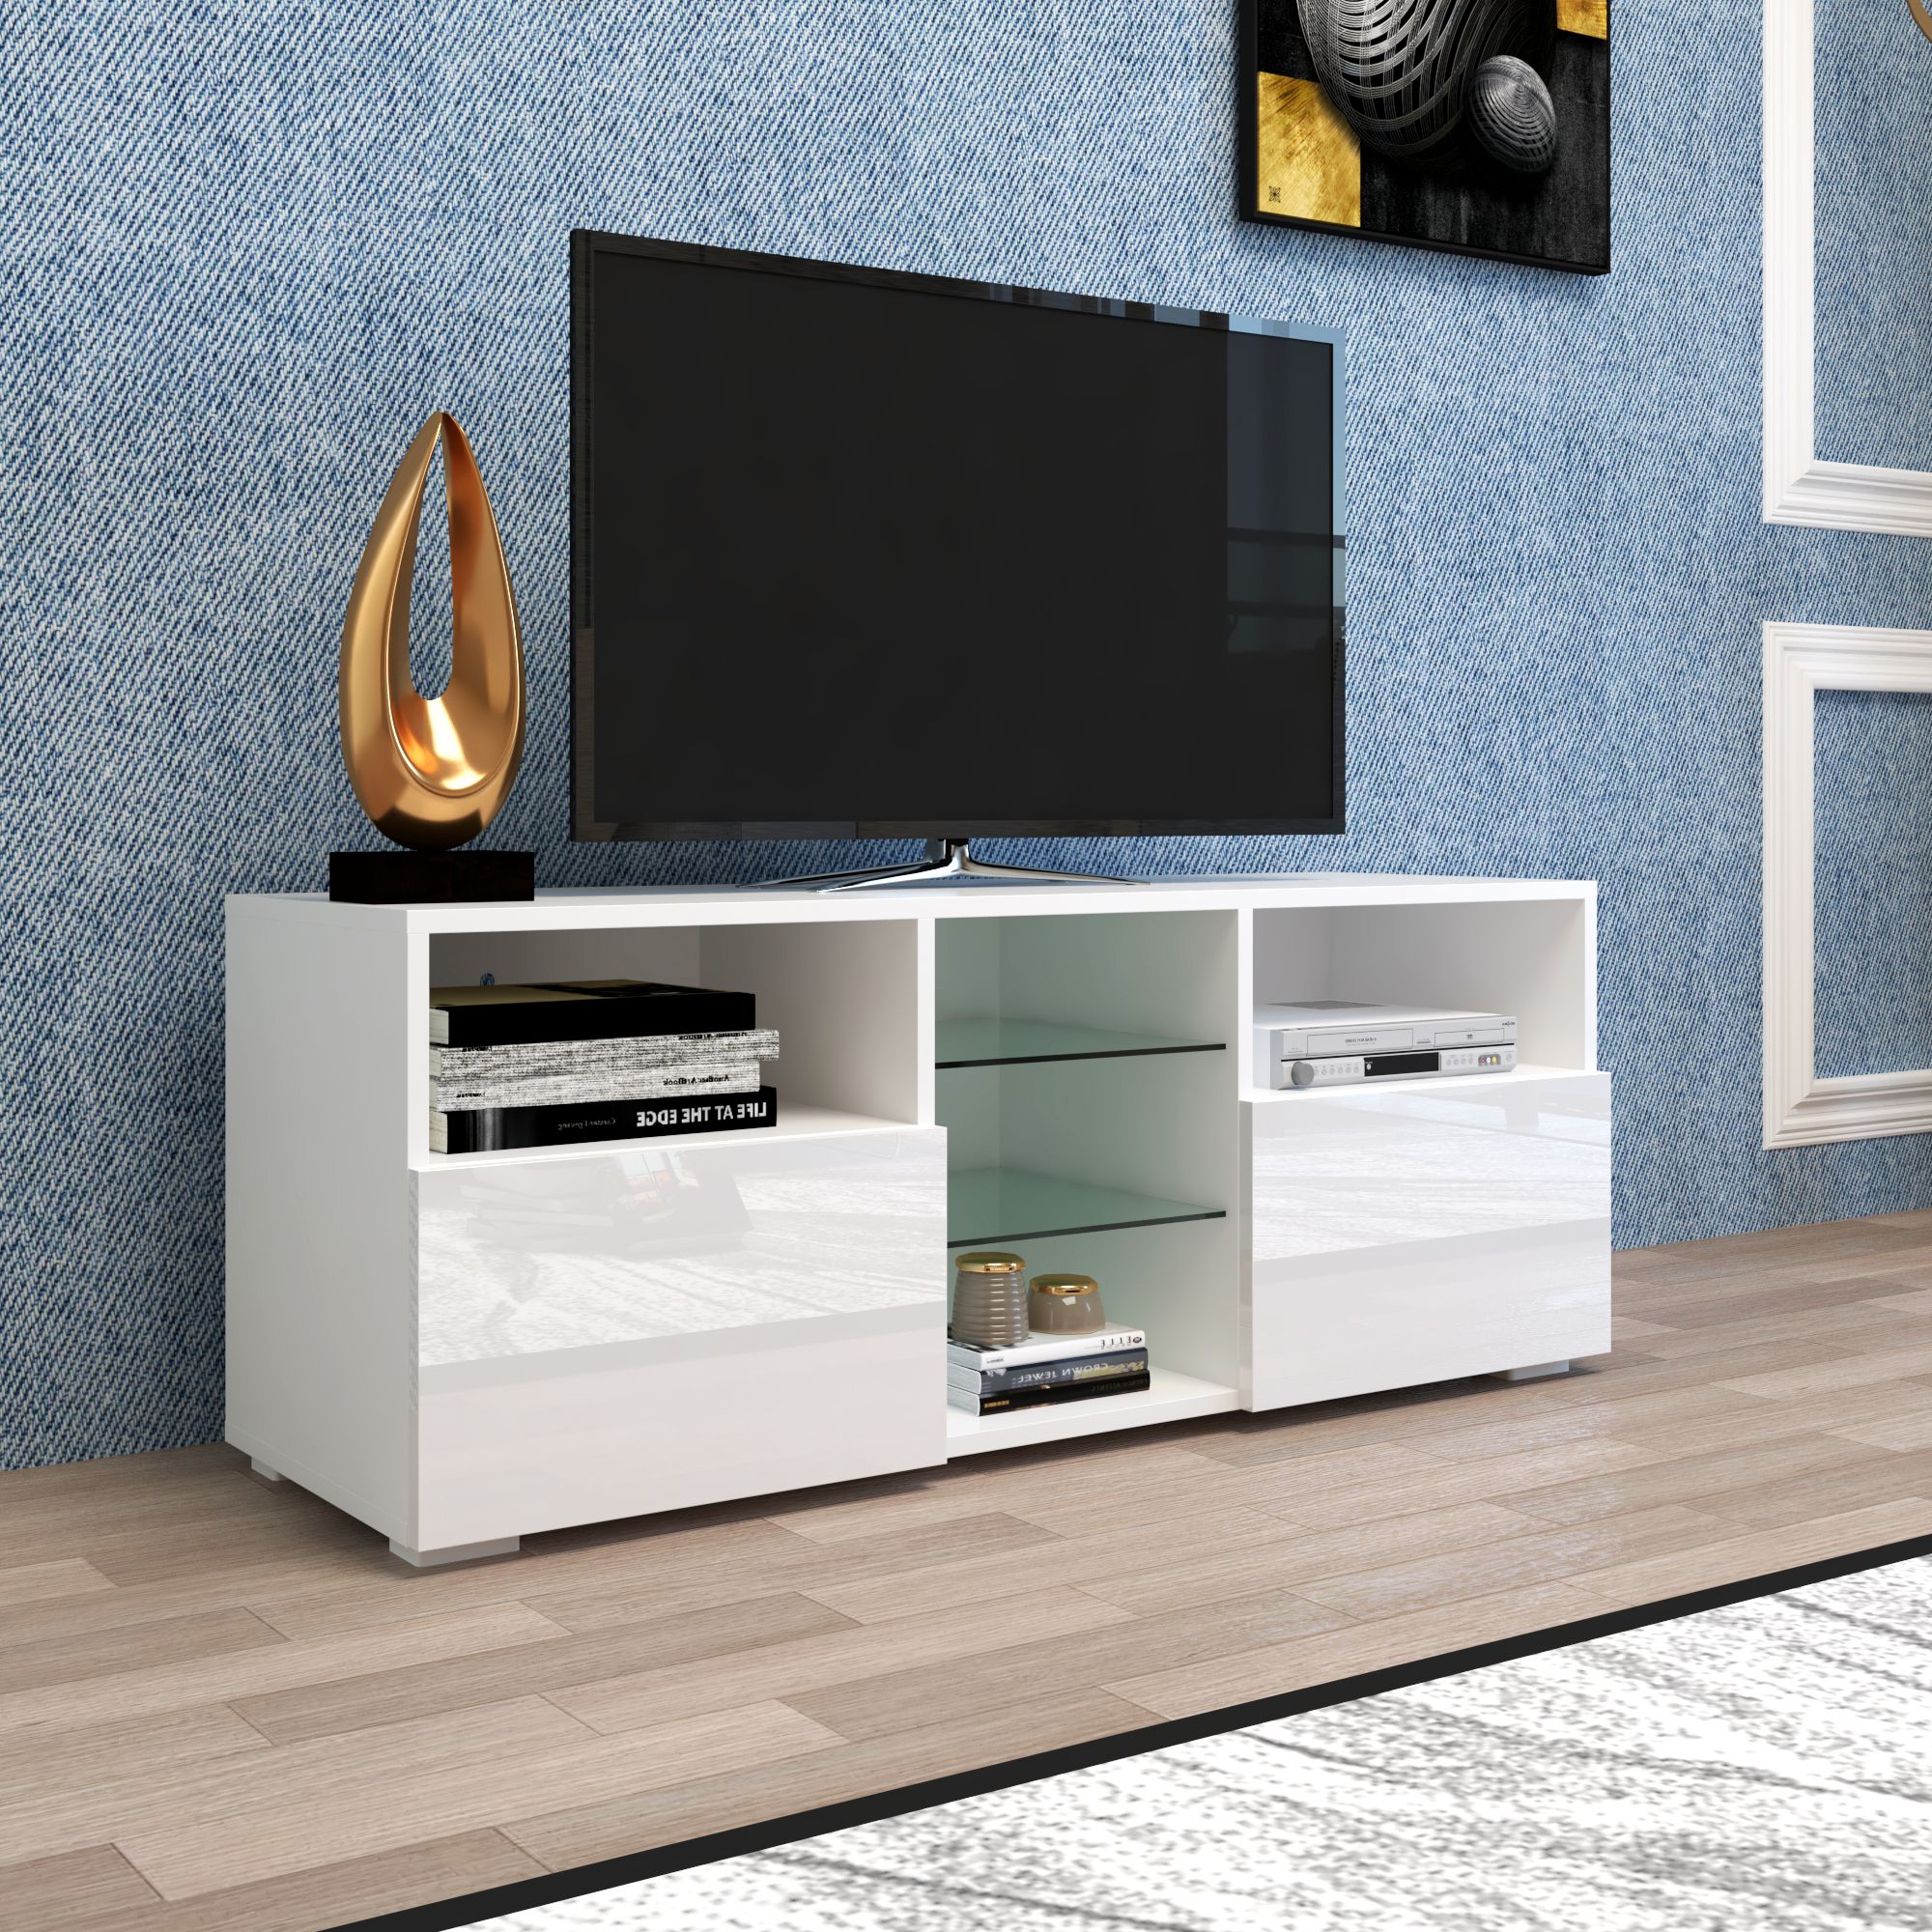 Yofe Tv Entertainment Center For Up To 65 Inch Tv, High Pertaining To Wolla Tv Stands For Tvs Up To 65" (View 9 of 20)